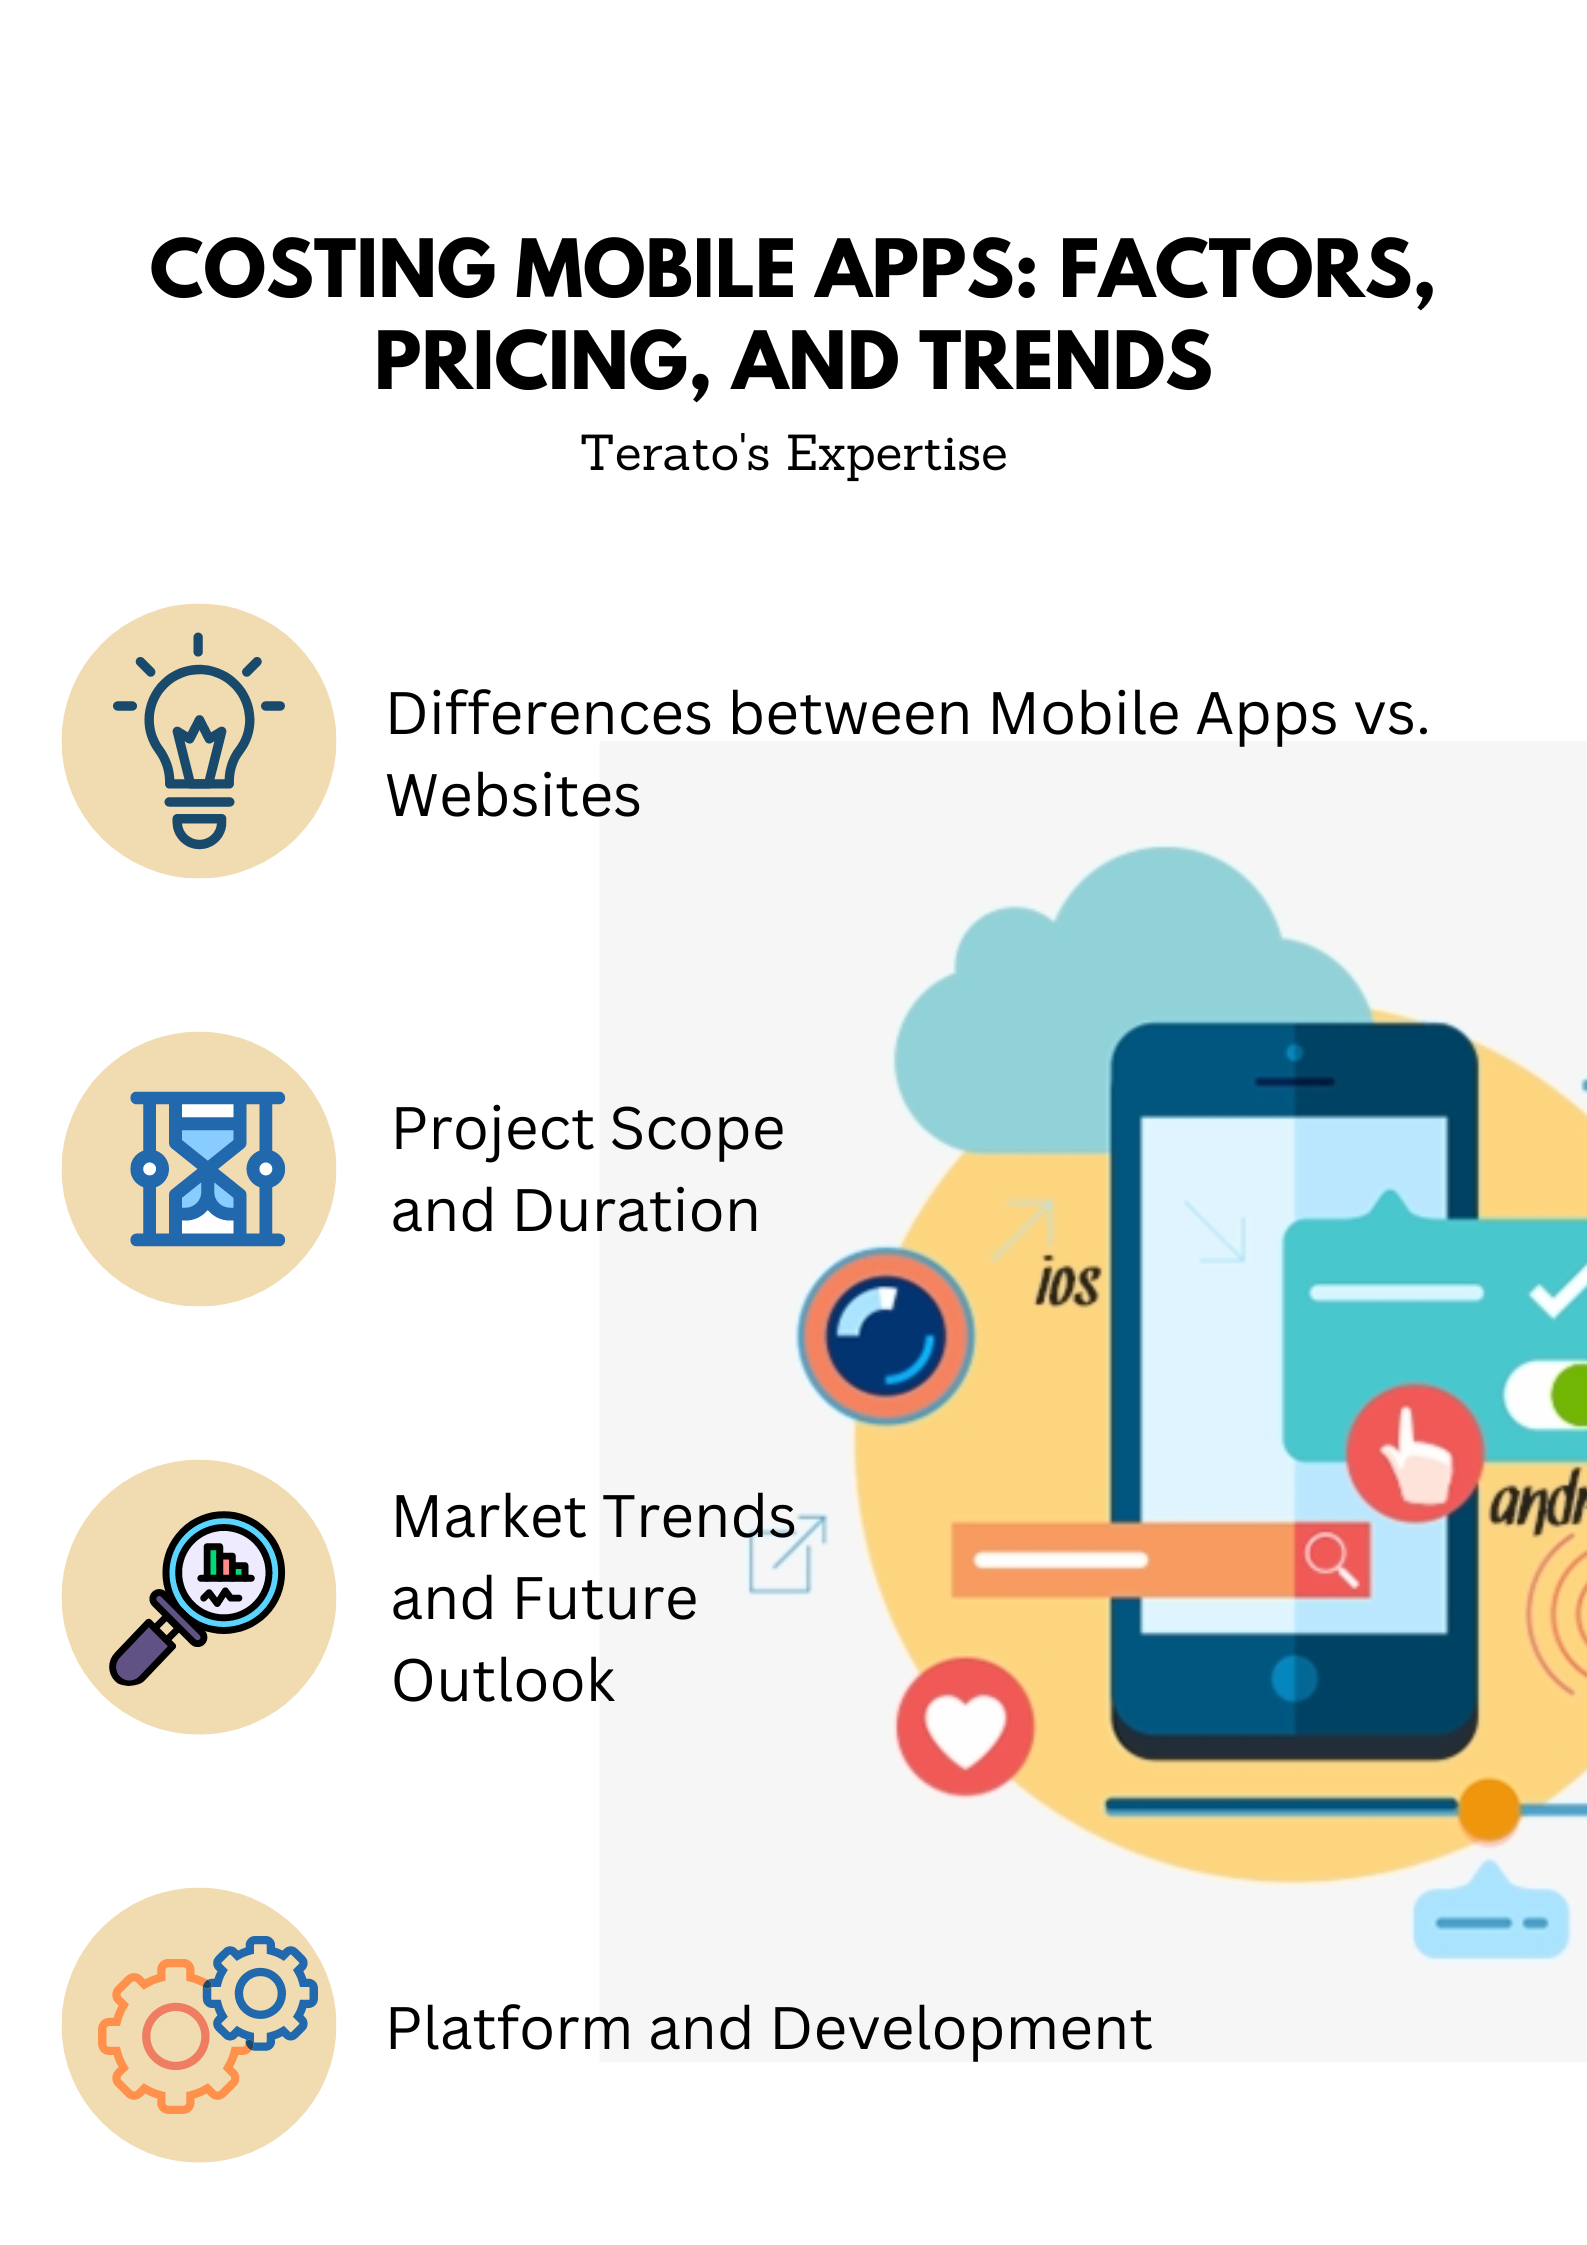 Costing Mobile Apps: Factors, Pricing, and Trends | Terato's Expertise